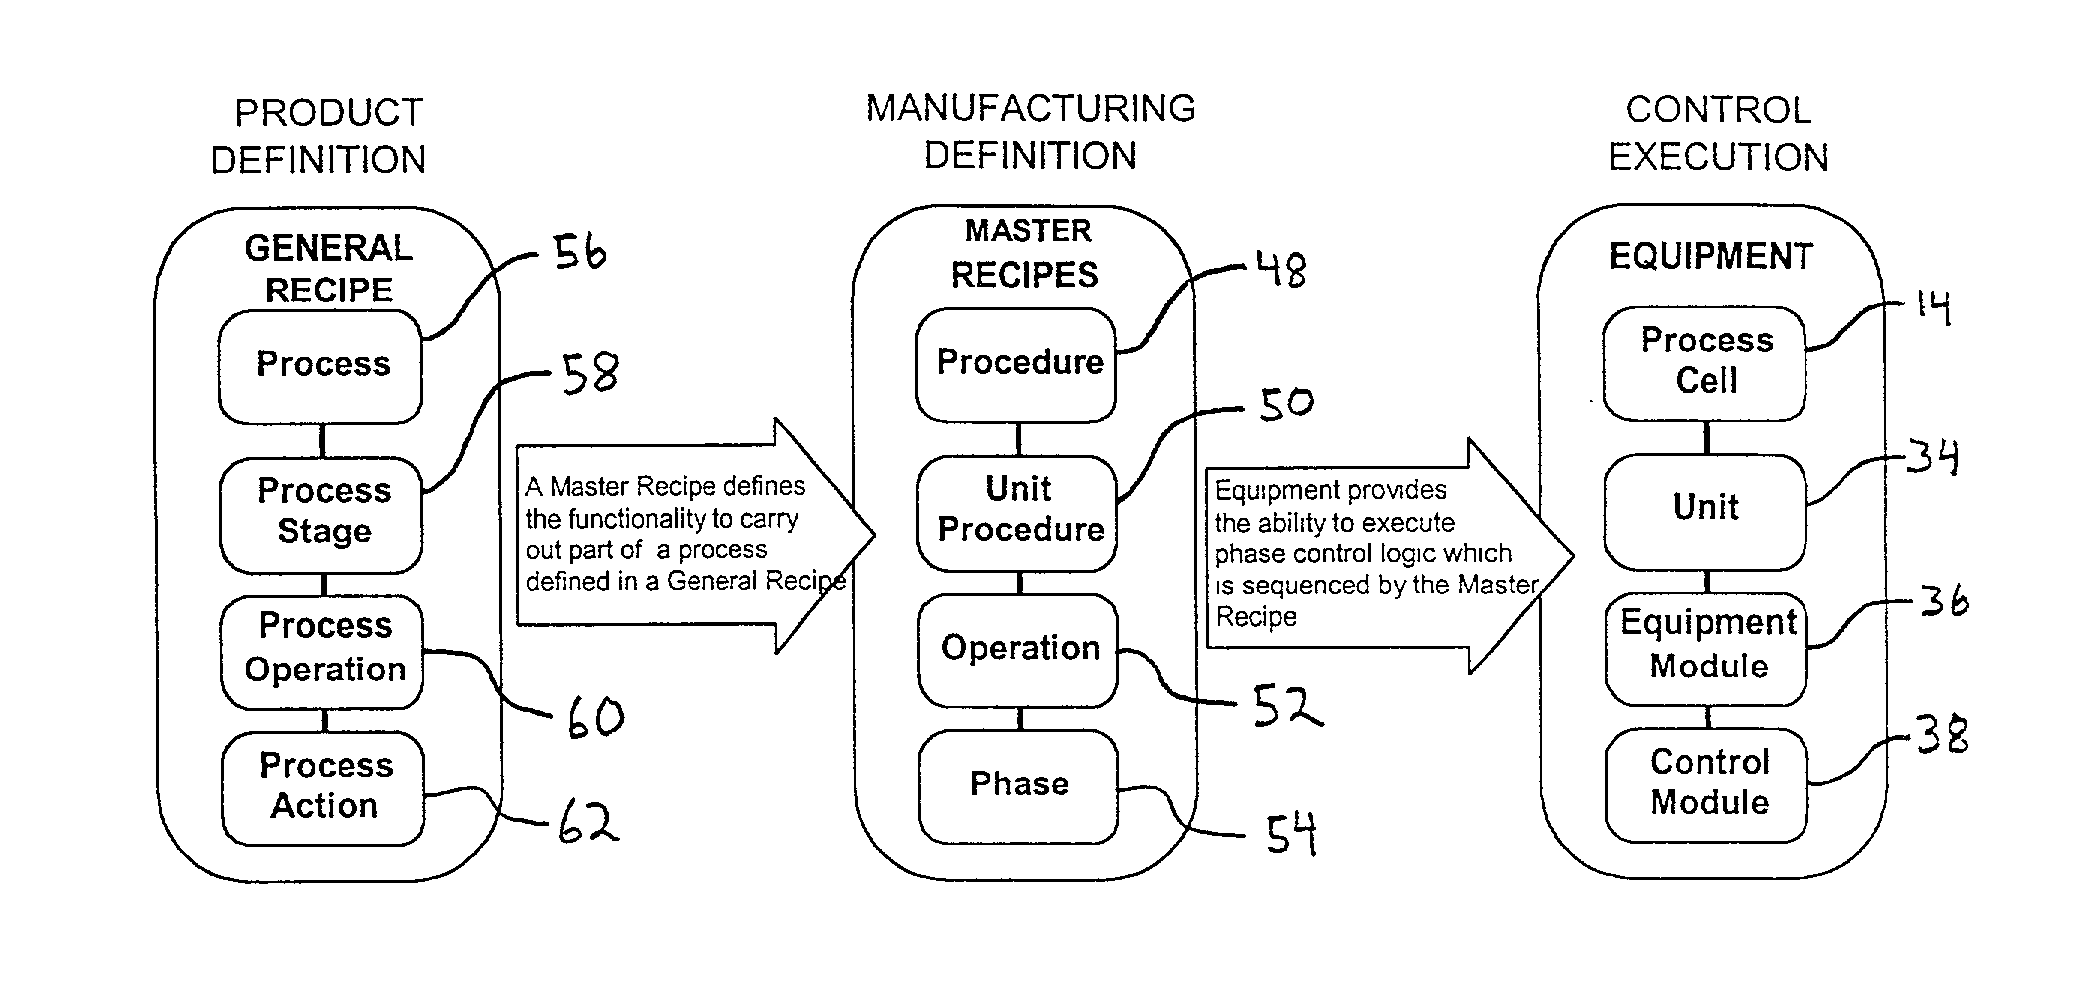 System and method for facilitating transactions between product brand managers and manufacturing organizations